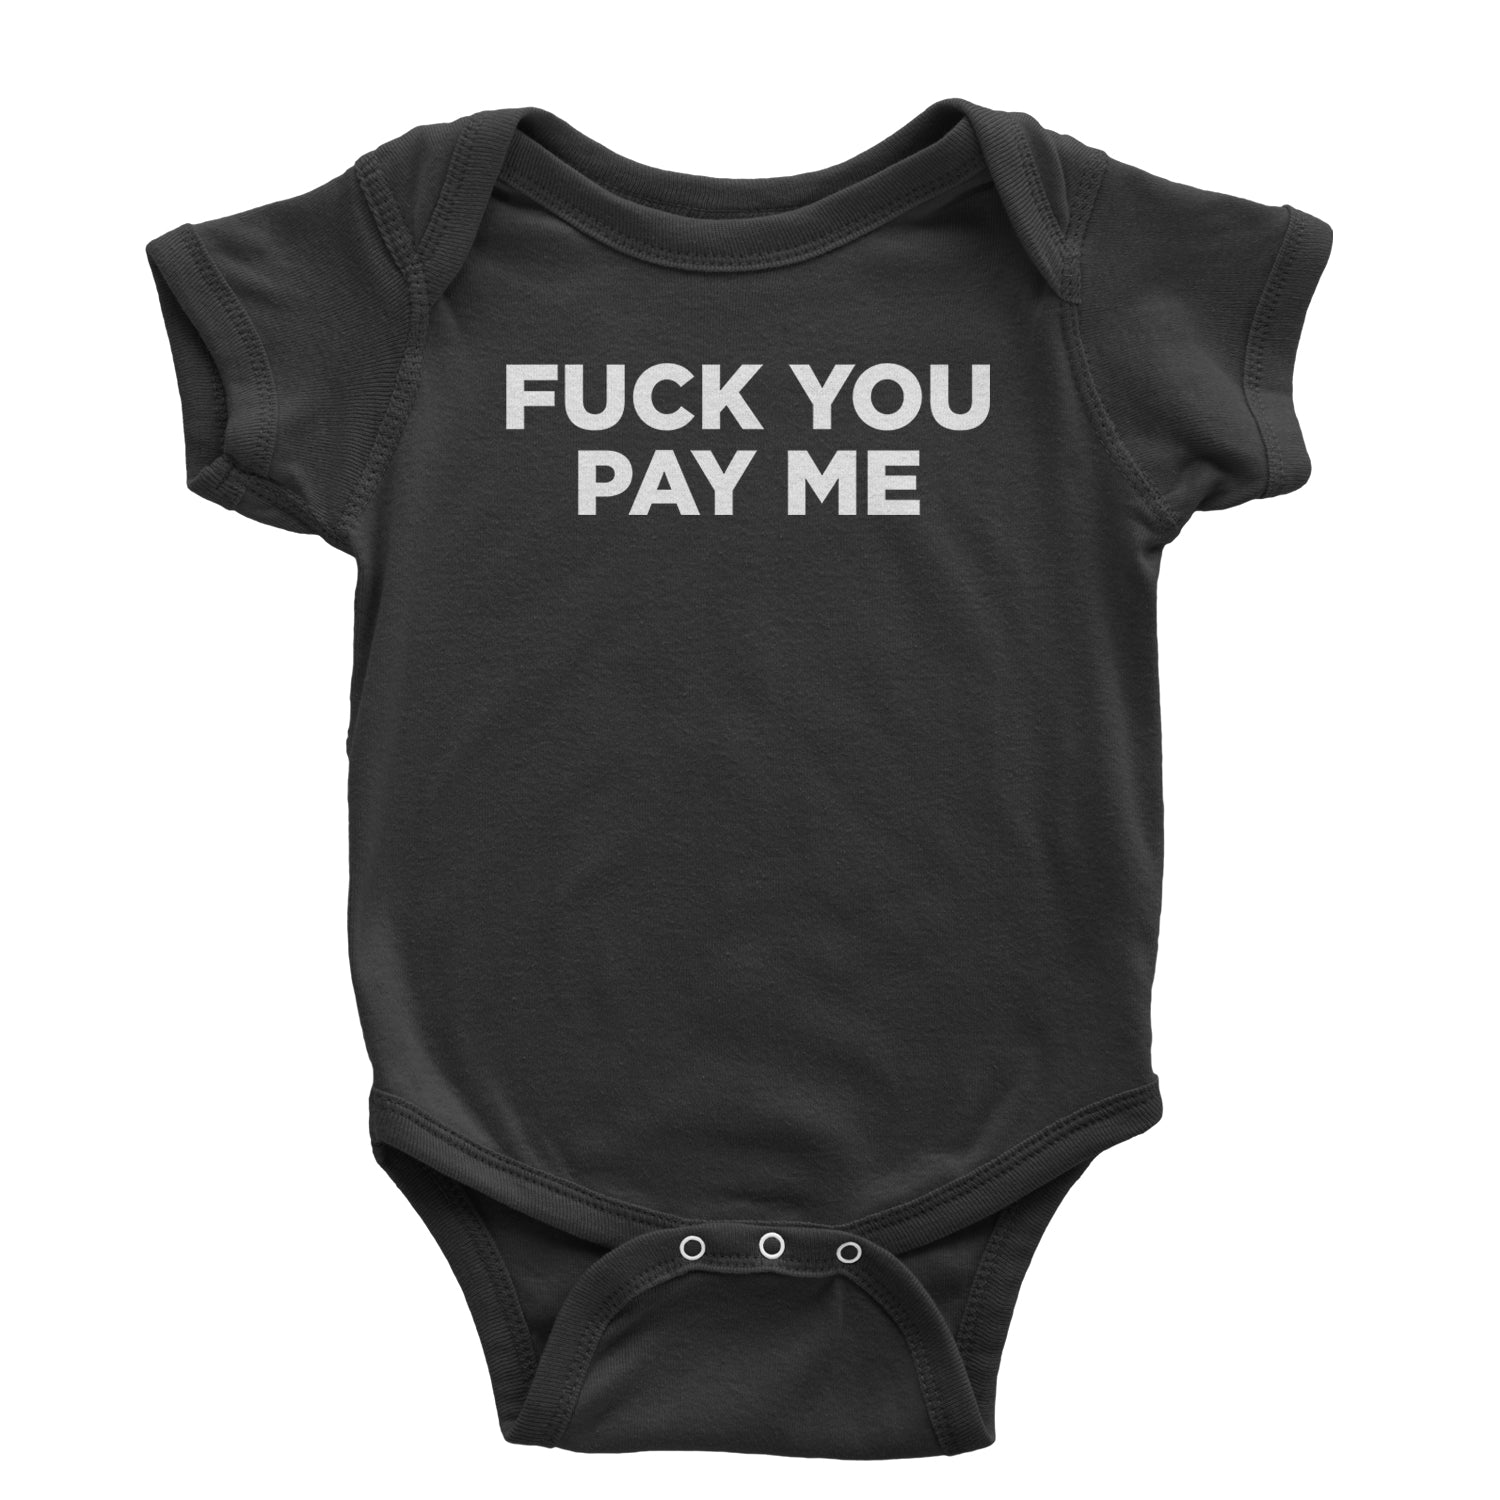 F-ck You Pay Me Demand Fair Pay Infant One-Piece Romper Bodysuit and Toddler T-shirt